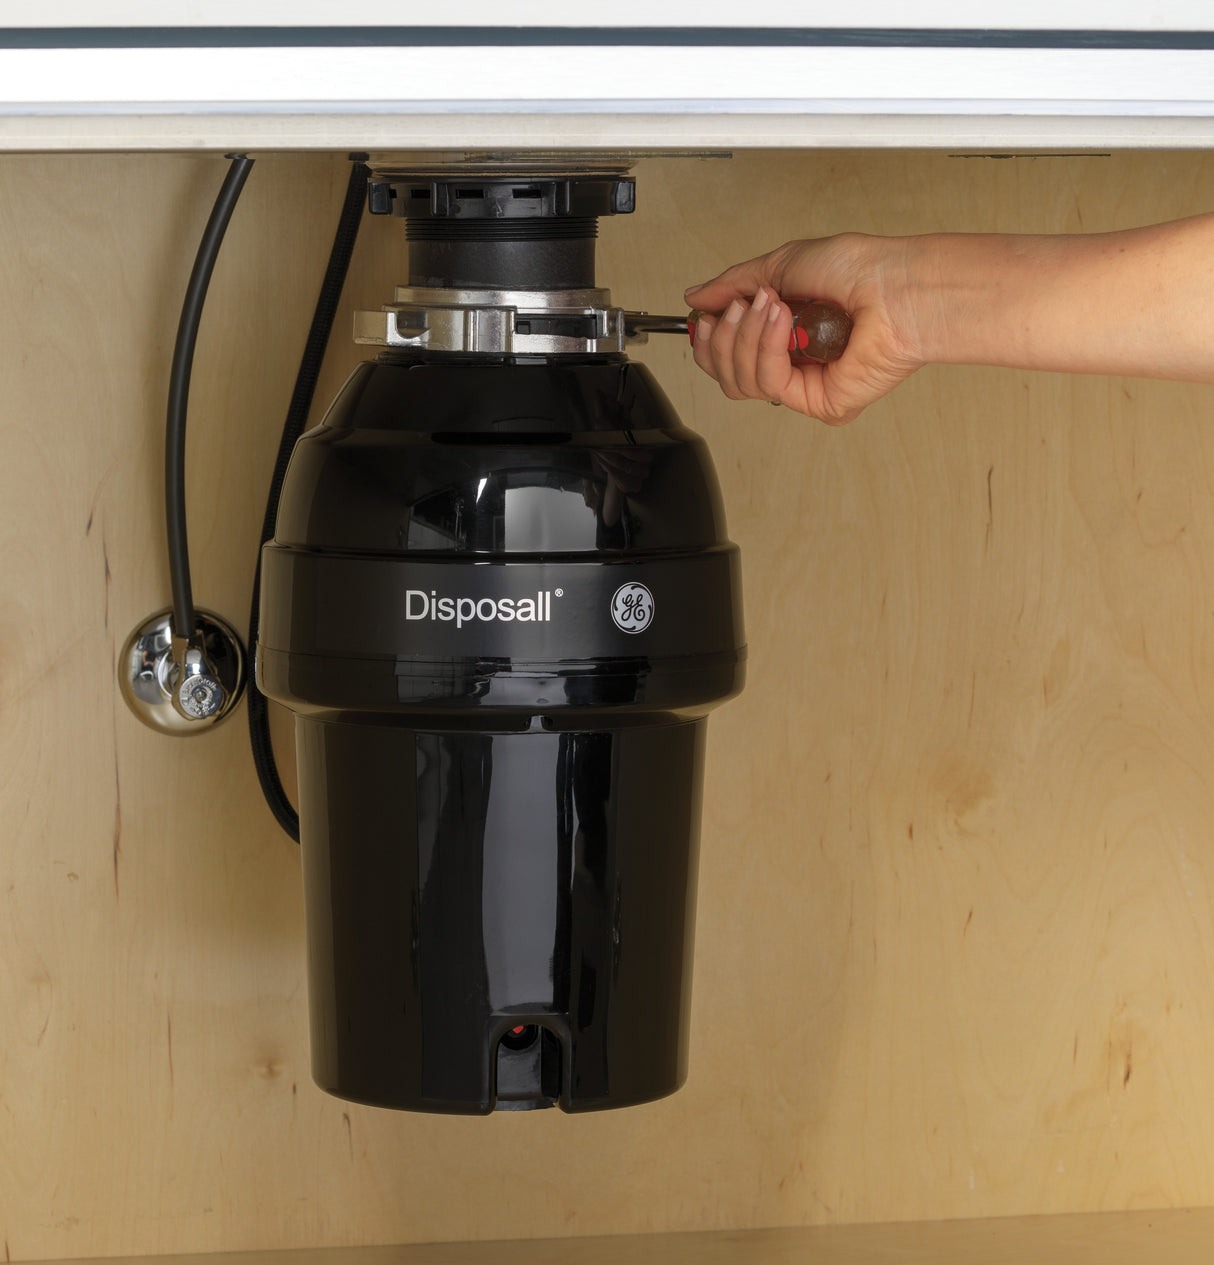 GE DISPOSALL(R) 1 HP Continuous Feed Garbage Disposer Non-Corded - (GFC1020N)